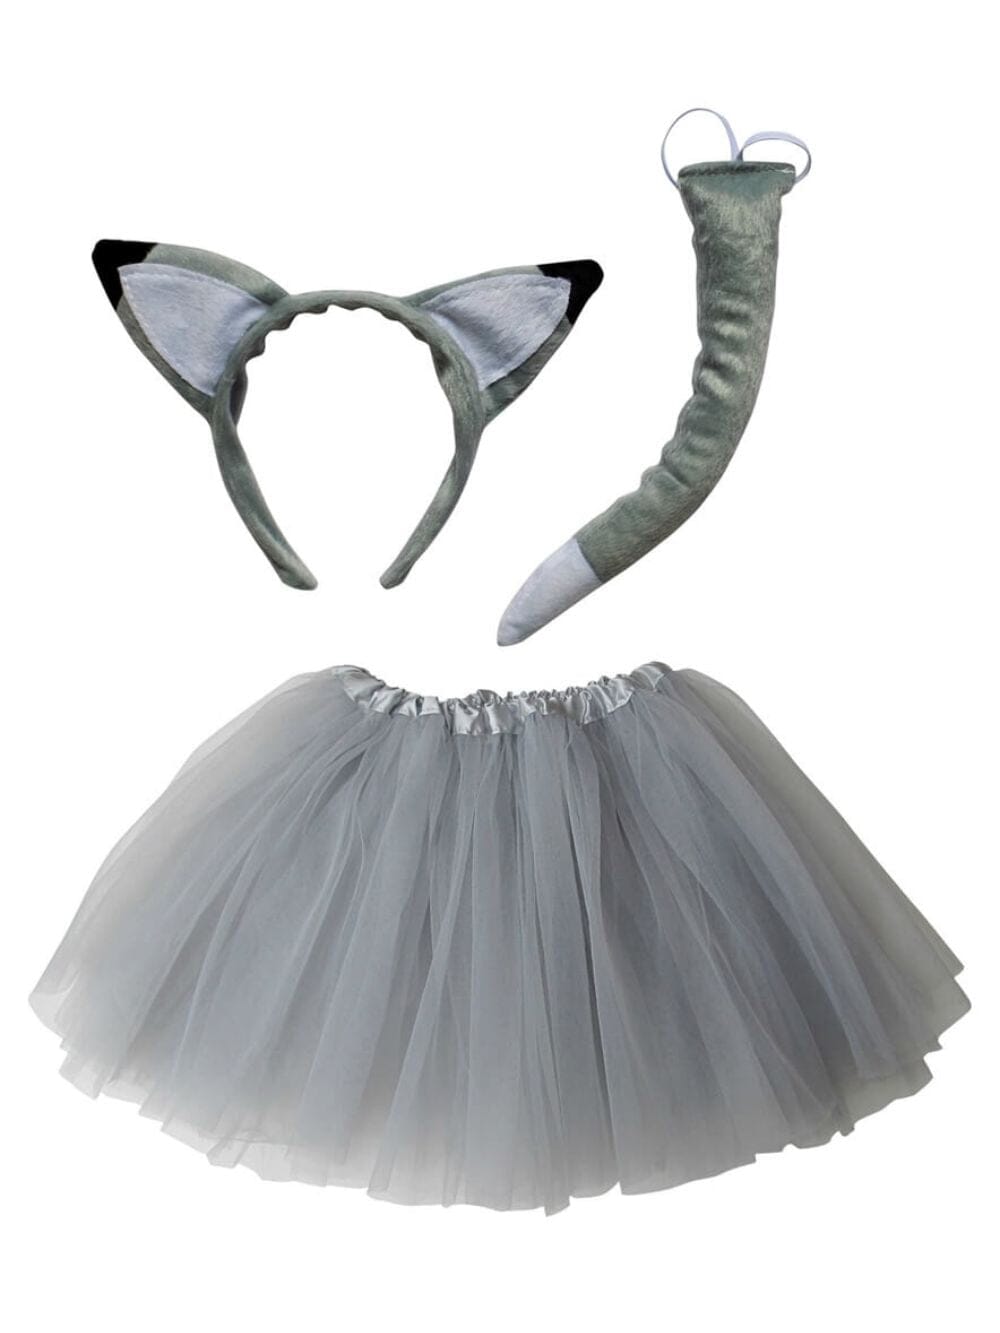 Adult Wolf Costume or Gray Fox Costume - Tutu Skirt, Tail, & Headband Set for Adult or Plus Size - Sydney So Sweet